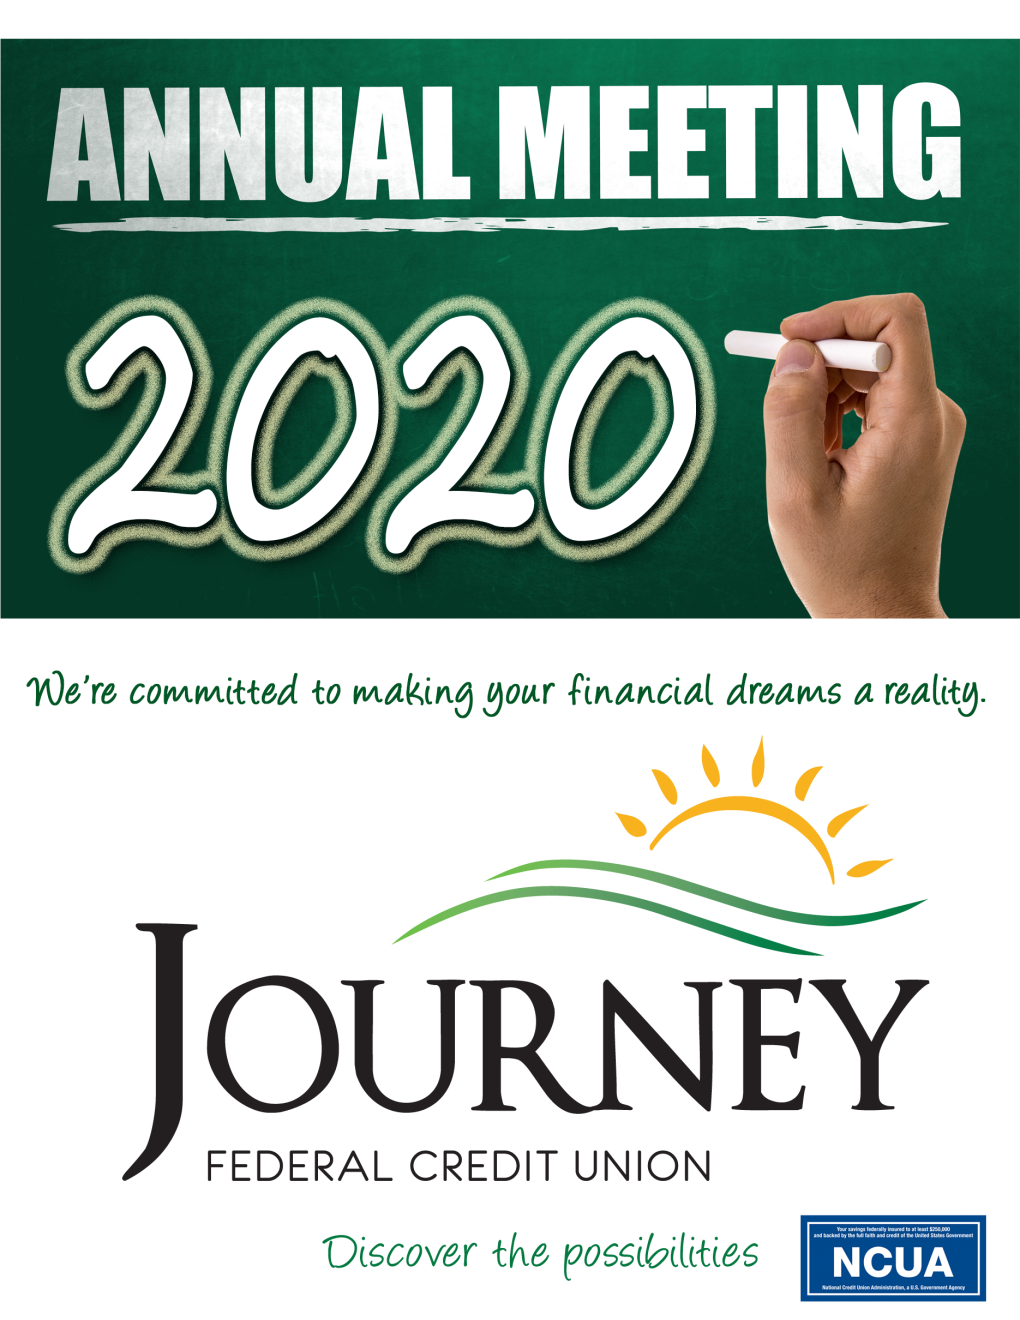 Annual Meeting Date: February 16, 2021 at 6:00 PM